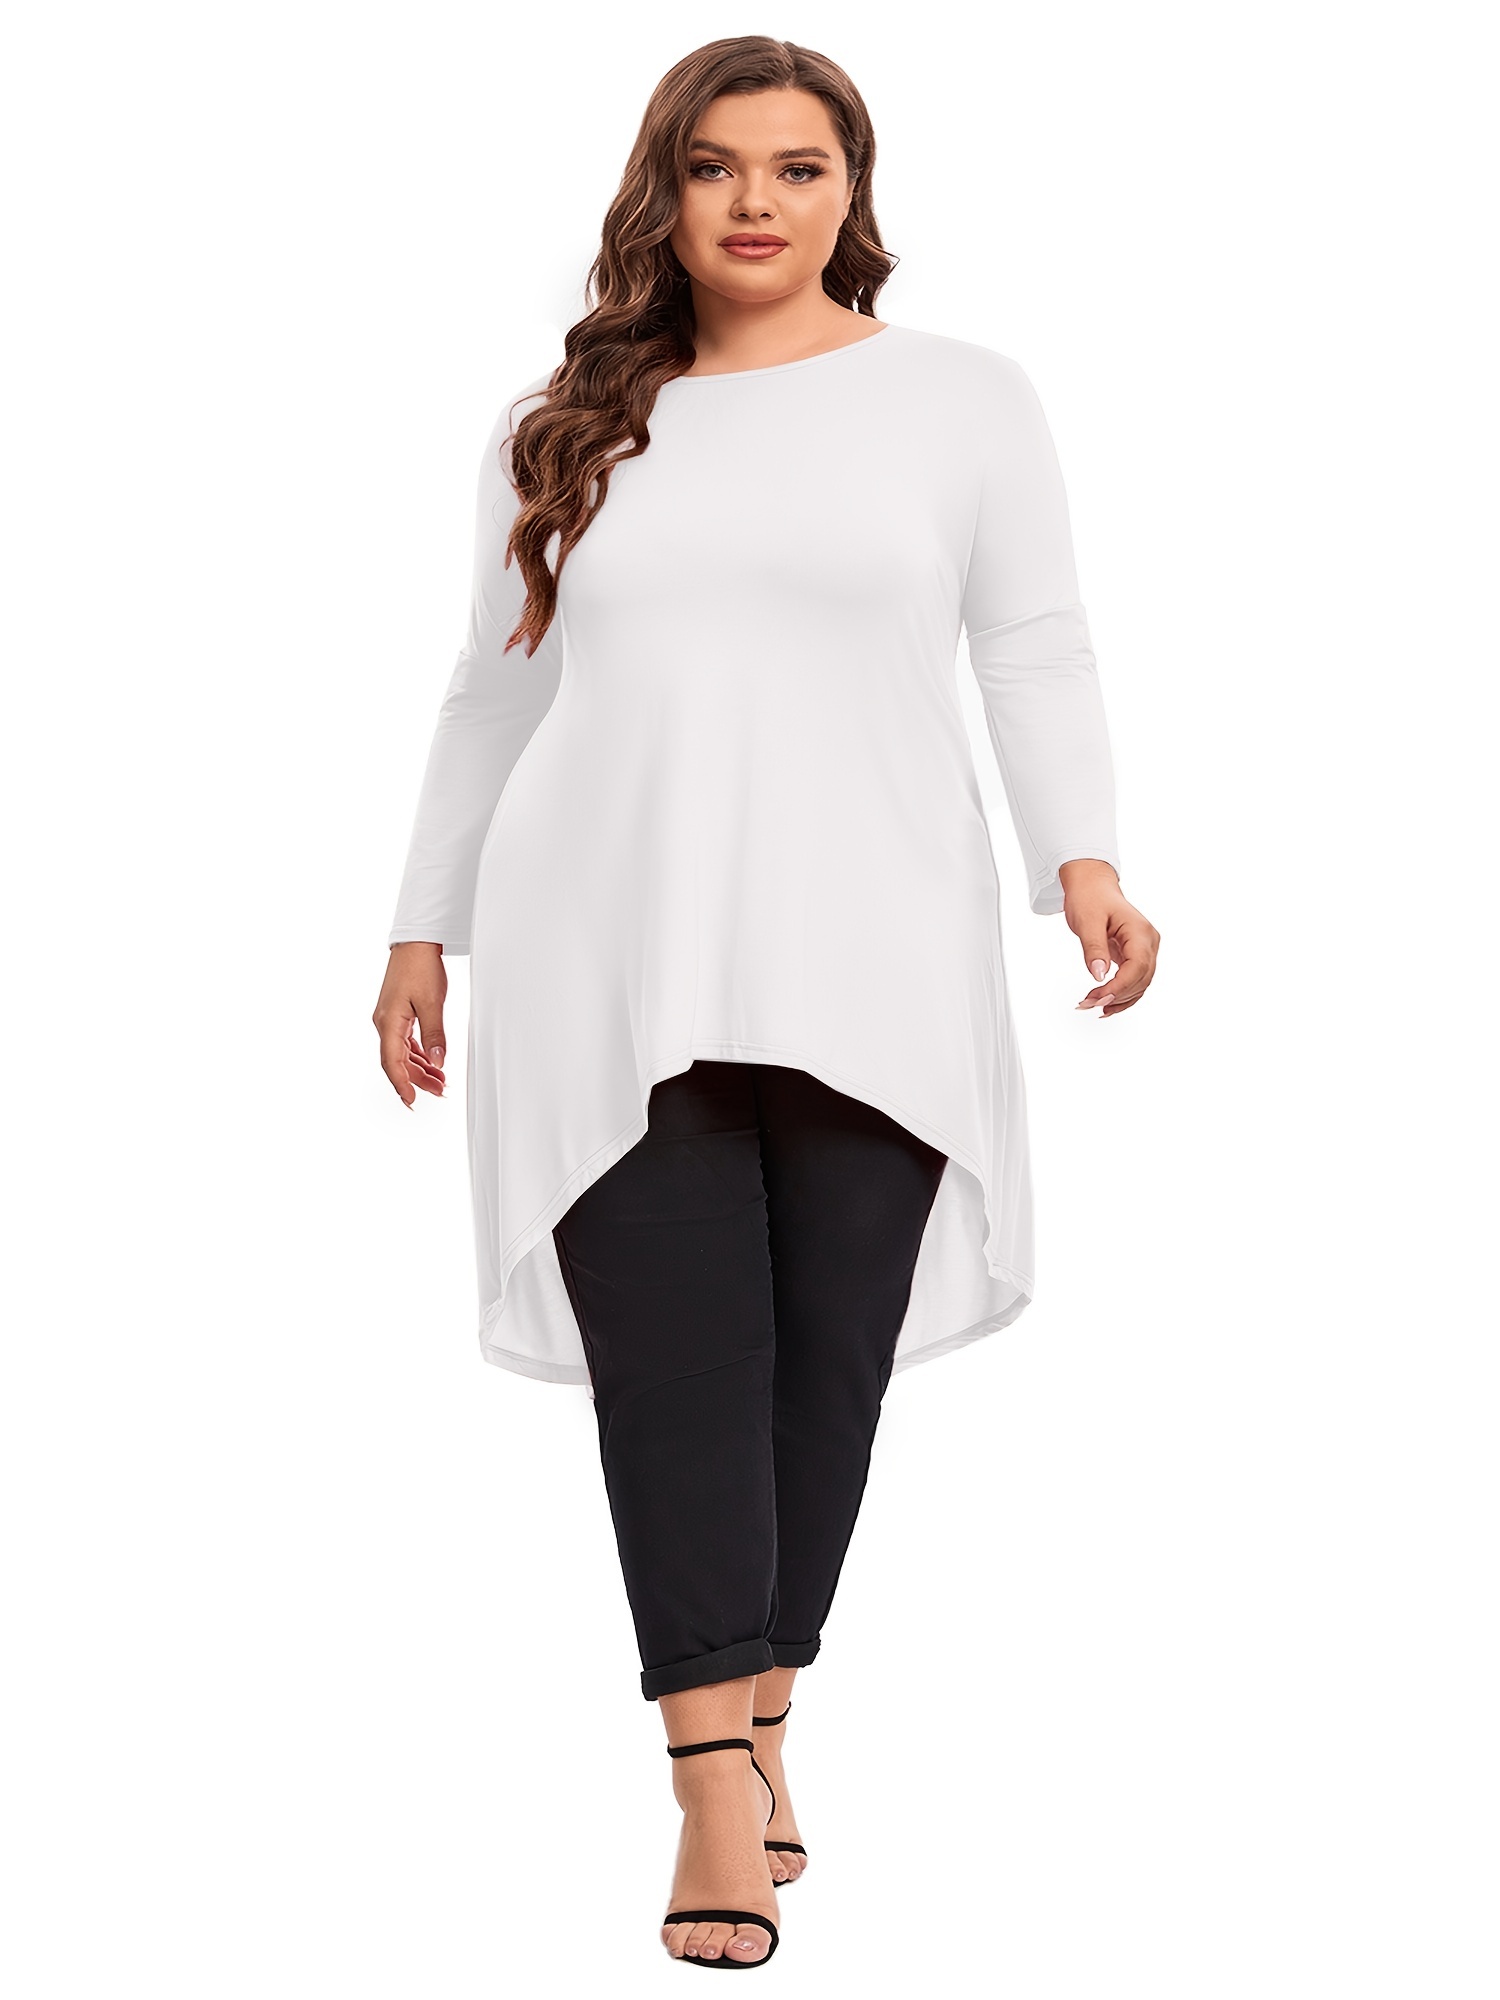 Plus Size Tops for Women, Everyday Low Price